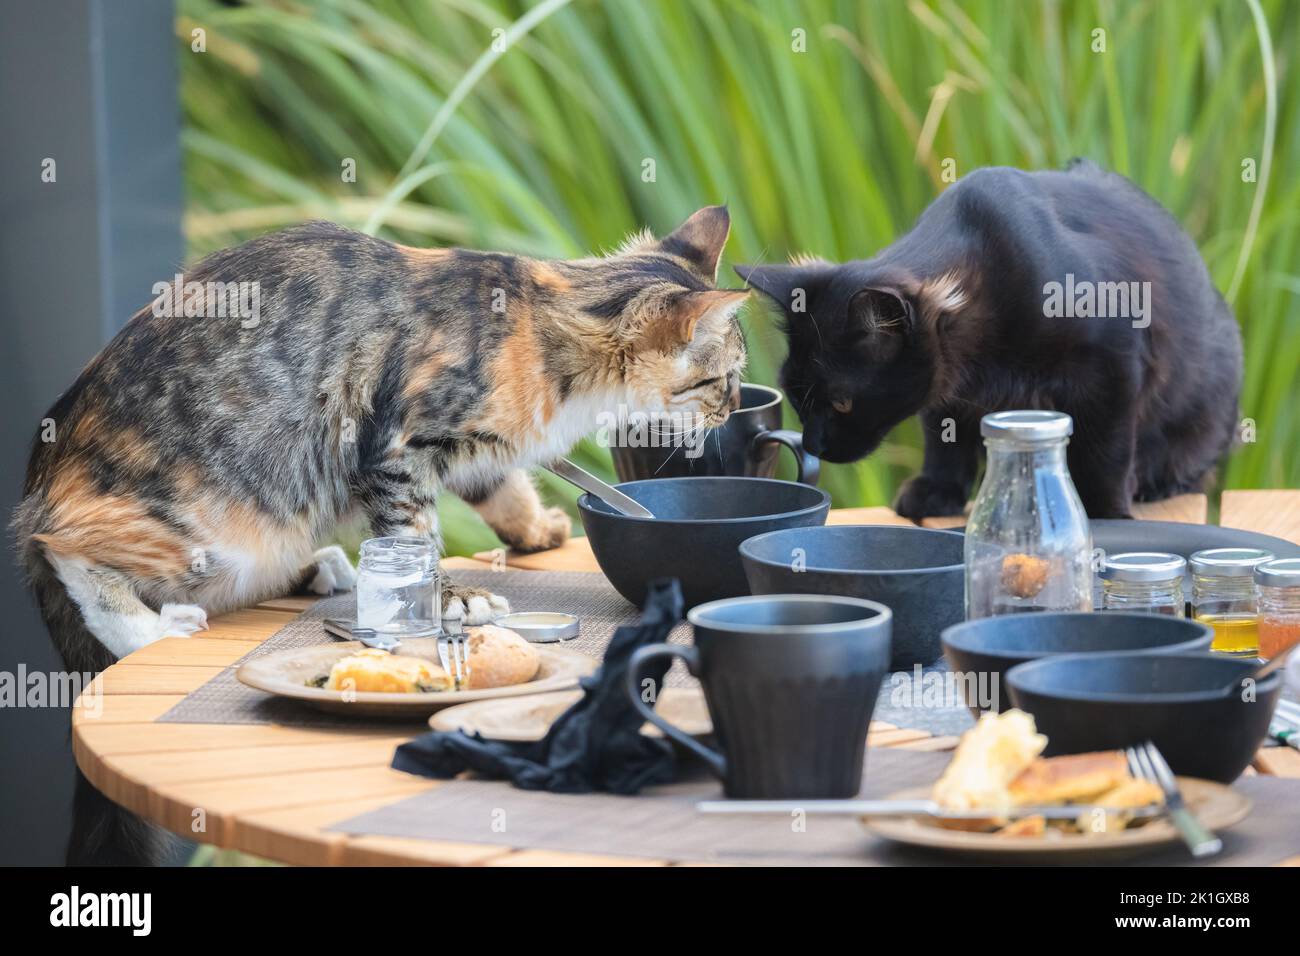 Mischievous and naughty tabby cat and black cat scavenge for food from leftover dishes on an outdoor breakfast table on the Greek island of Santorini, Stock Photo